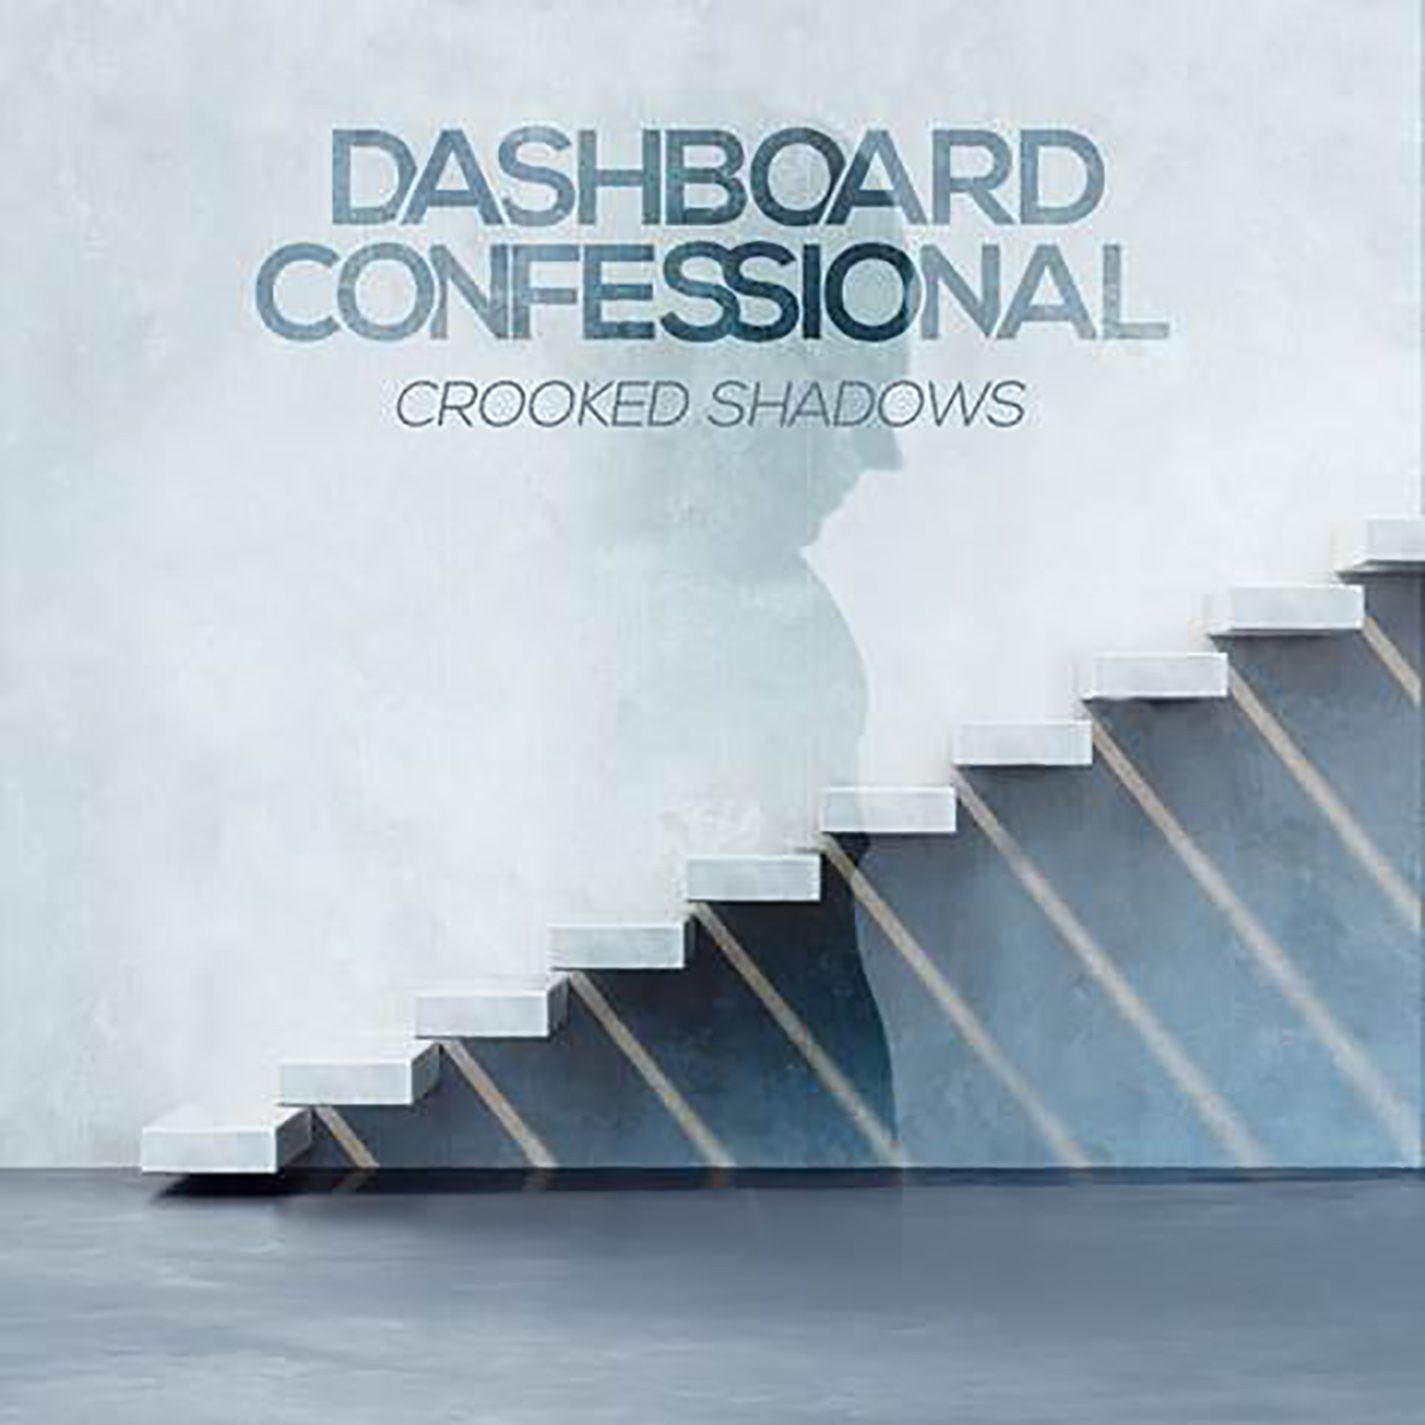 [DAMAGED] Dashboard Confessional - Crooked Shadows